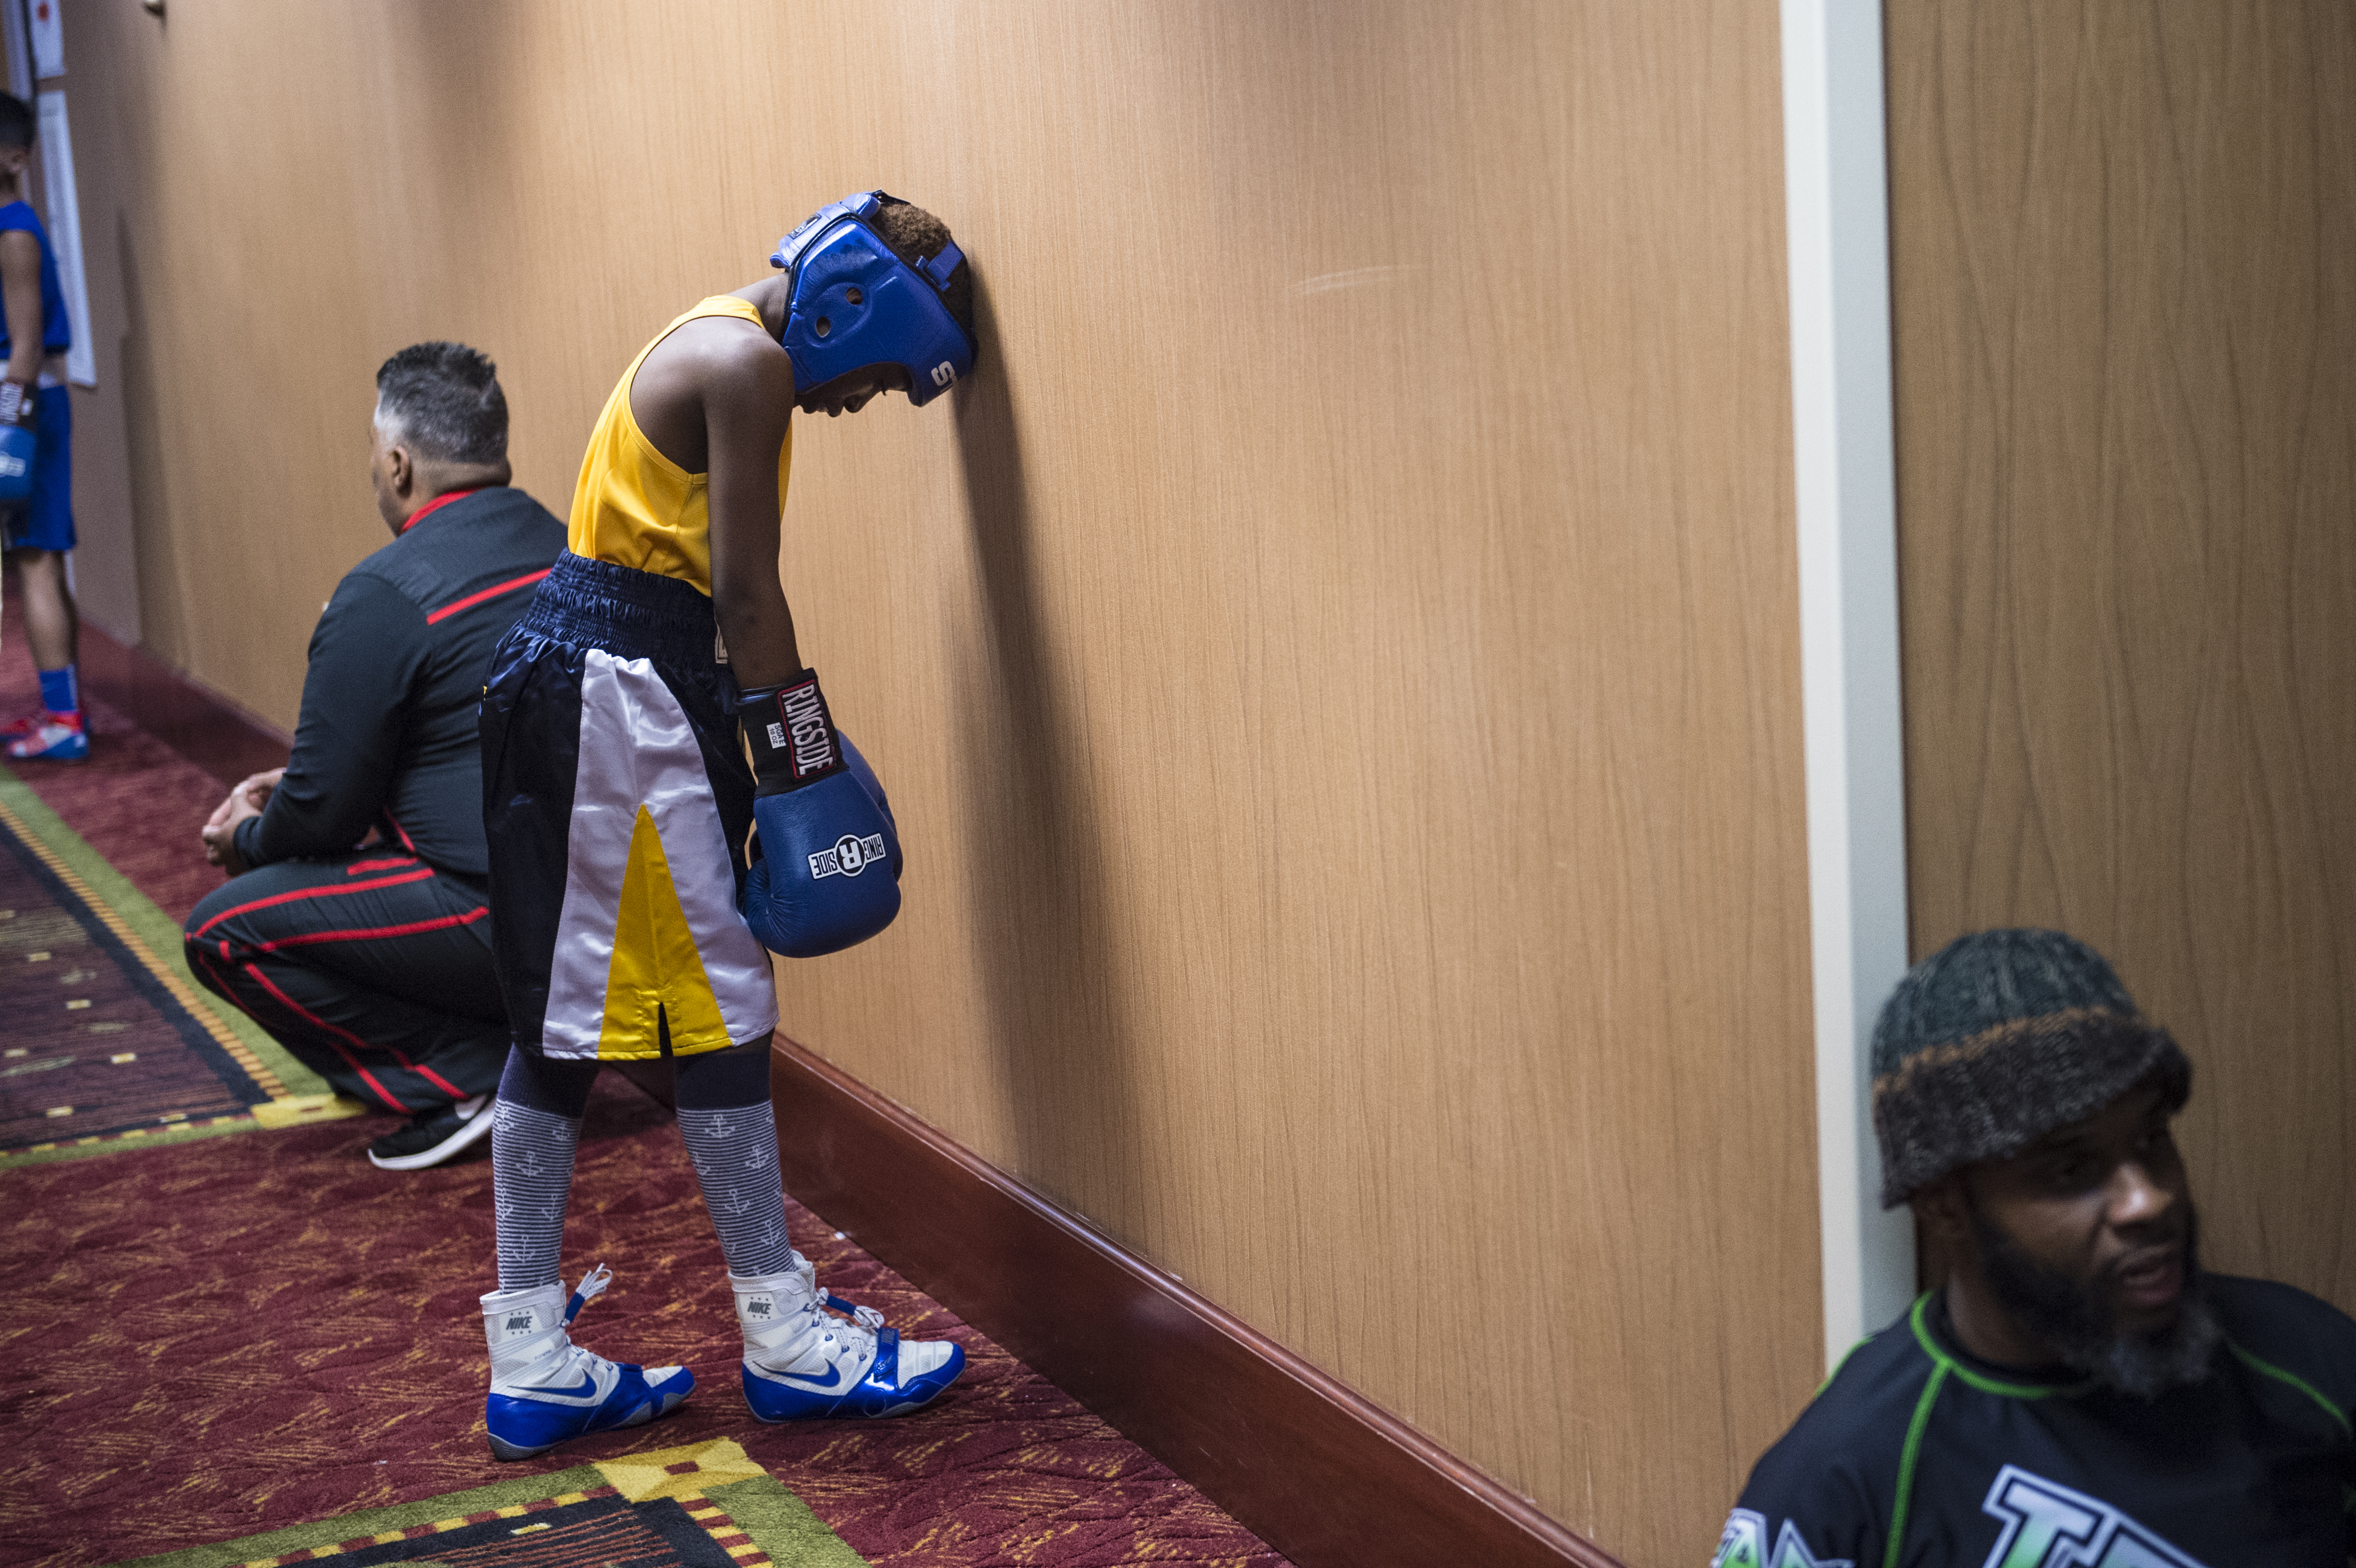 Lungz waits in the hallway for his championship match to be called to the ring.